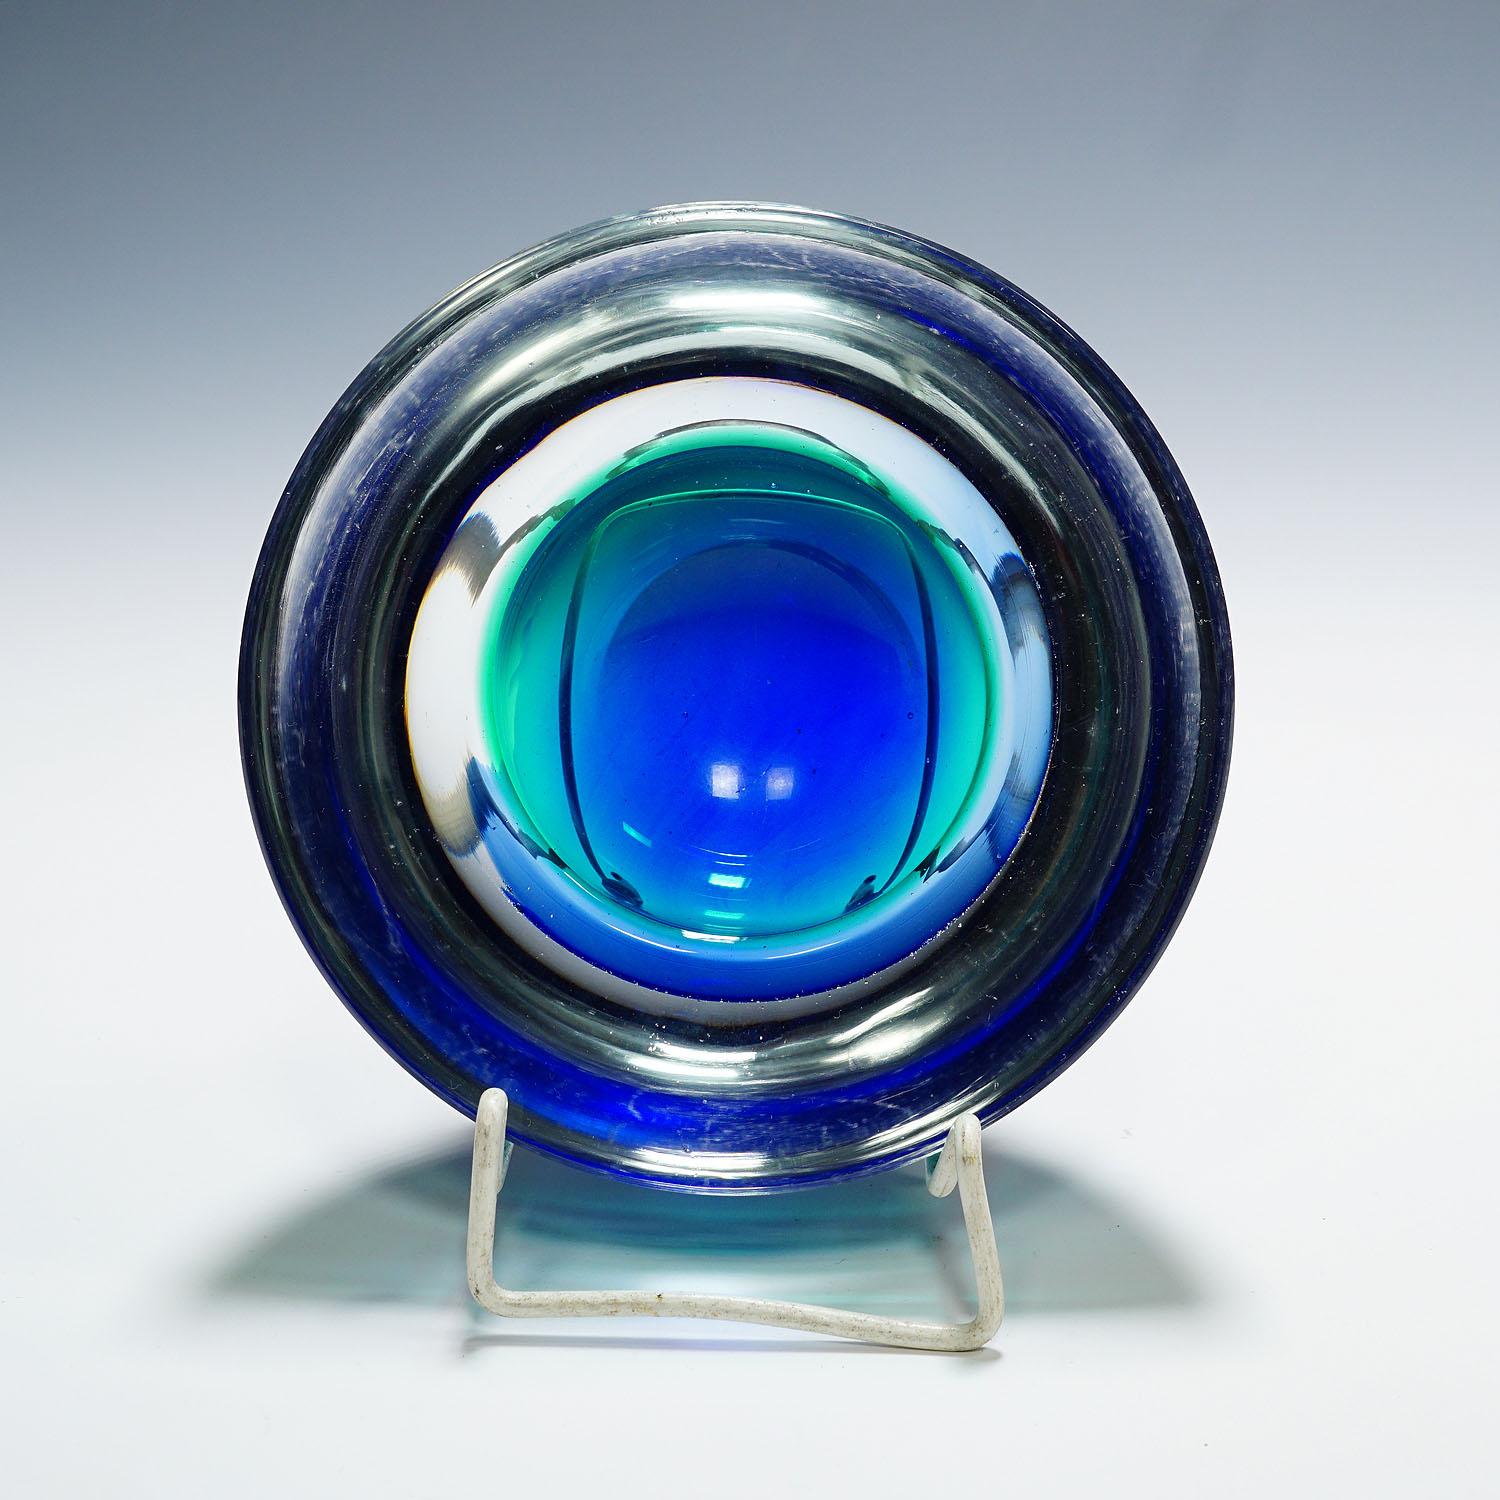 Hand-Crafted Archimede Seguso Geode Bowl in Blue and Green, Murano Italy ca. 1960s For Sale